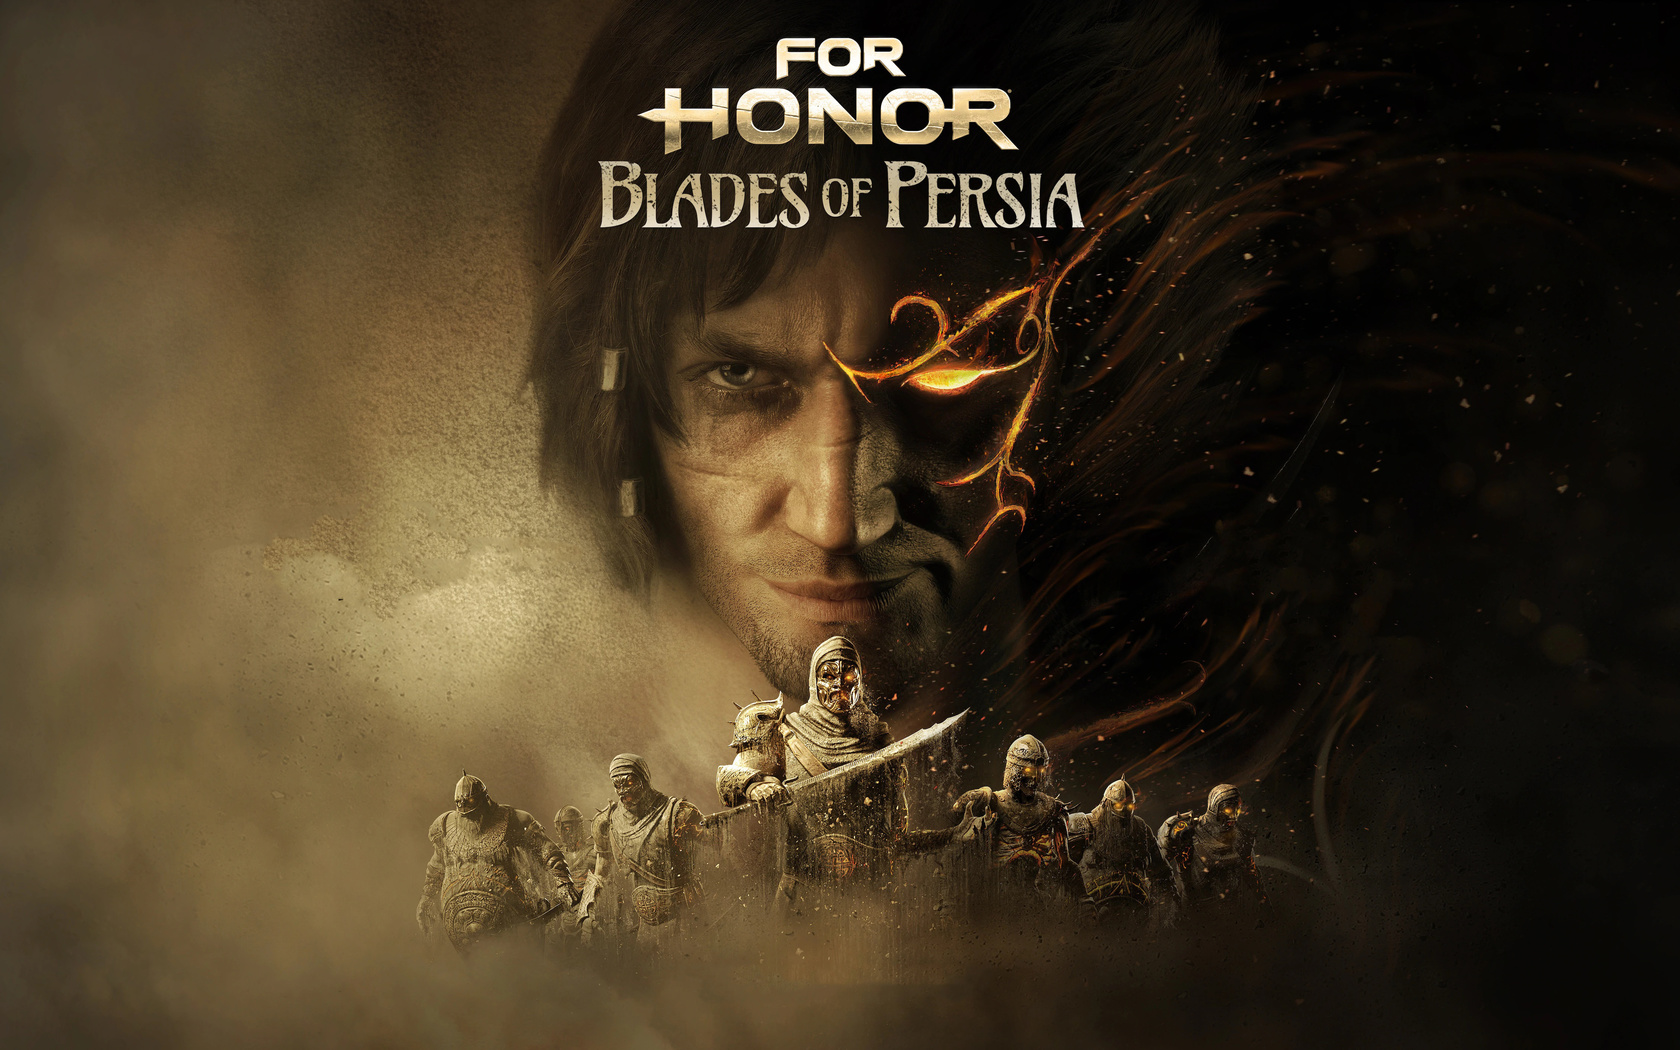 for honor, blades of persia, games